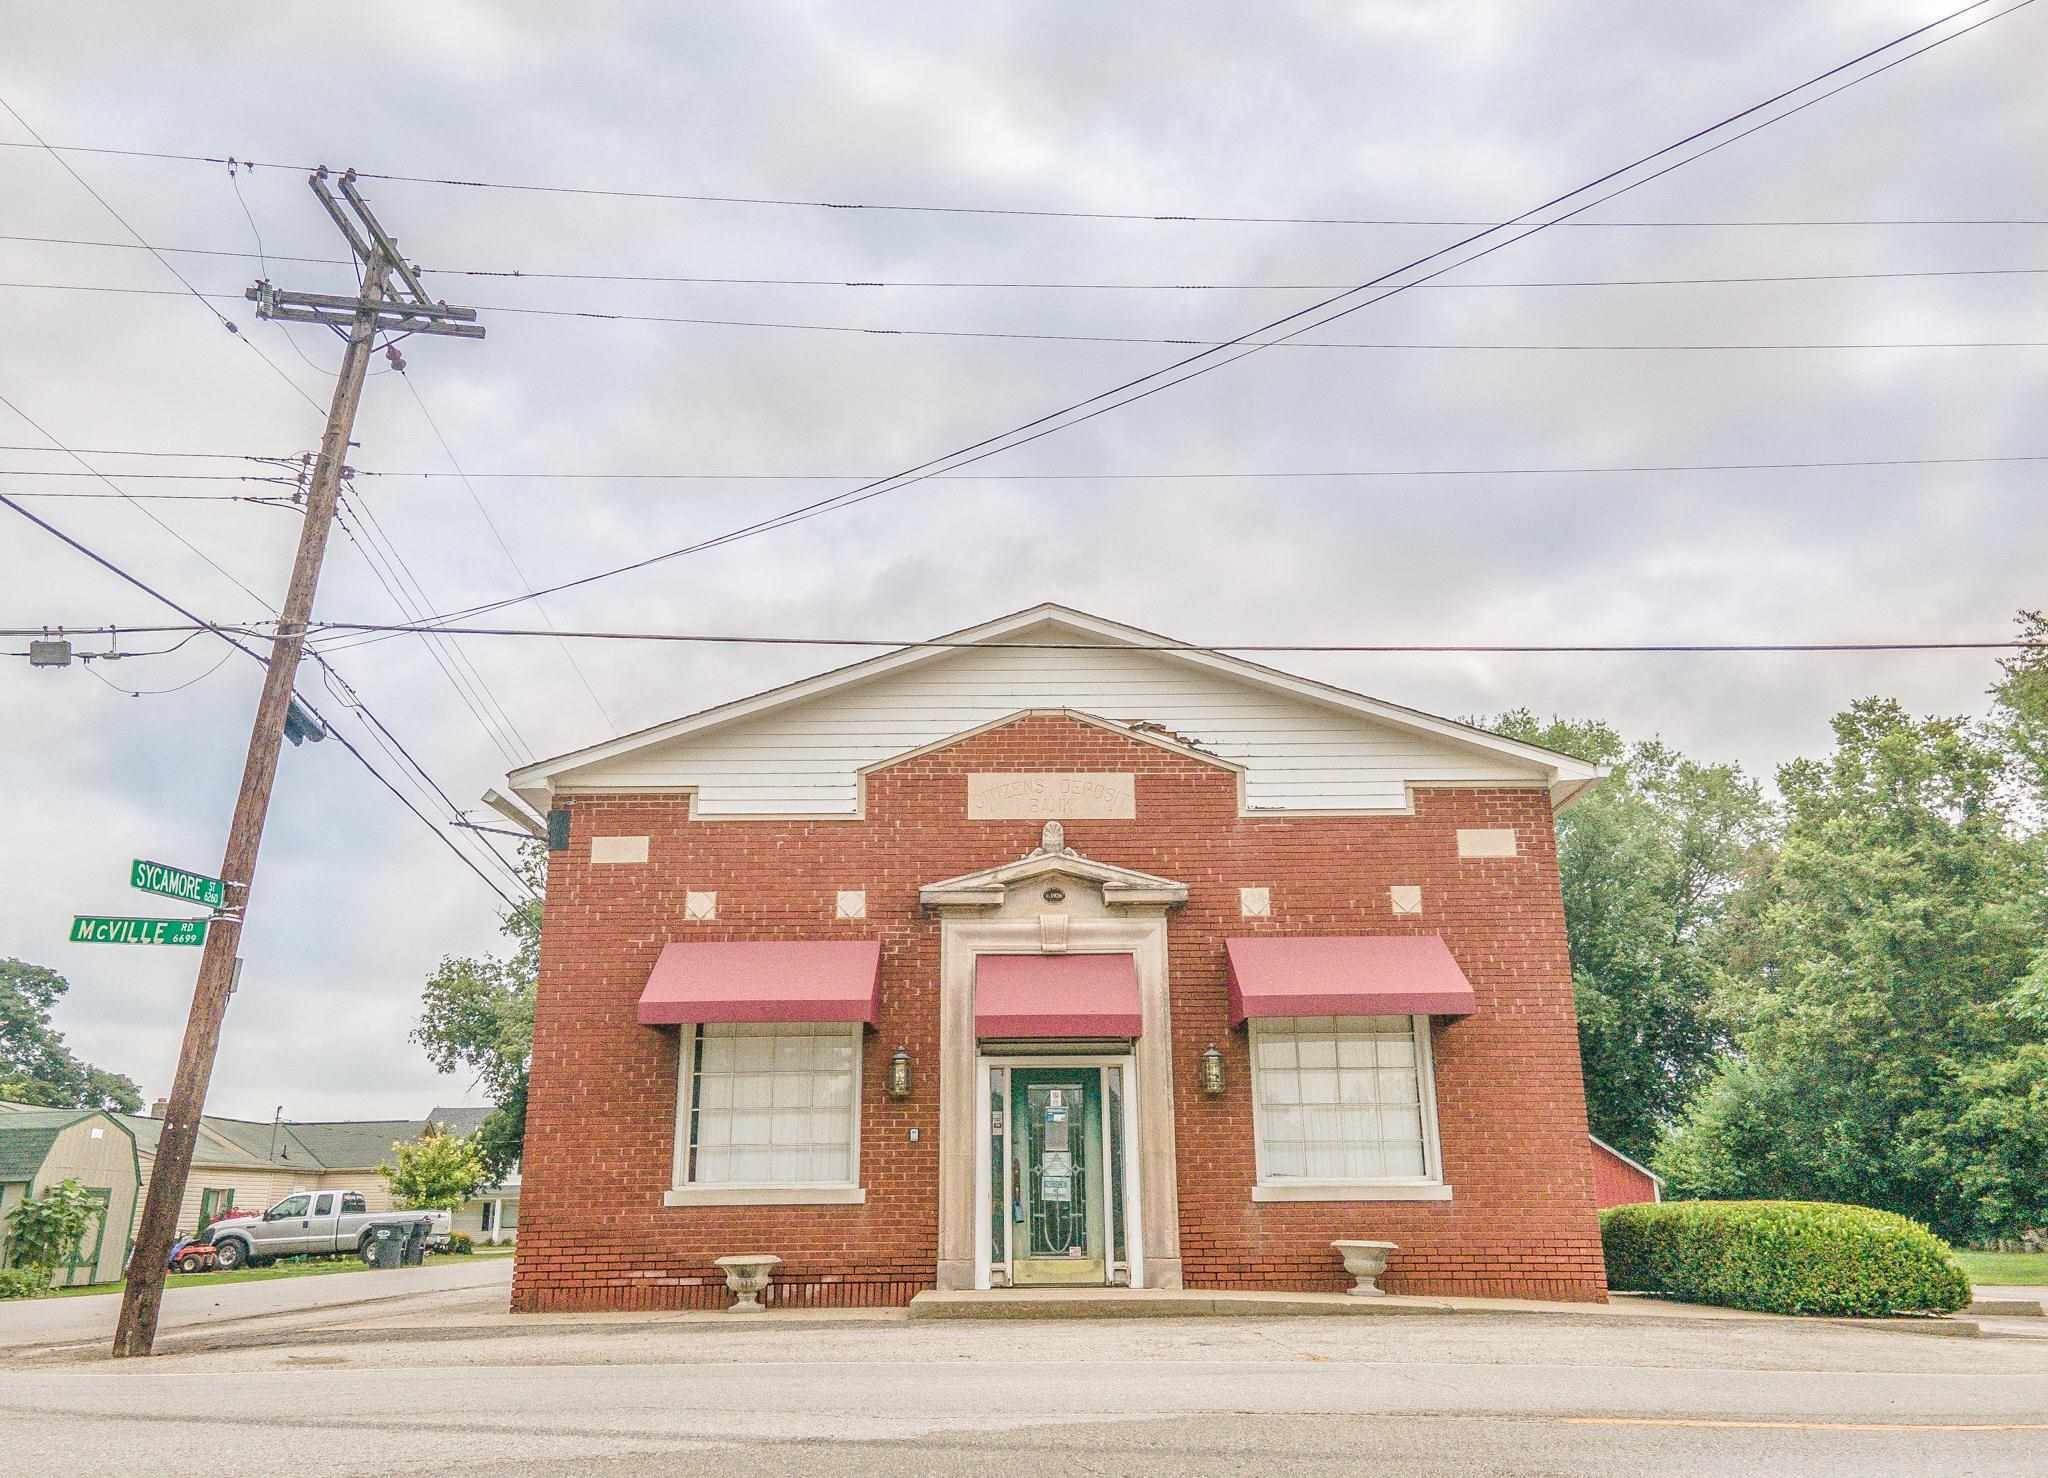 19. Offices for Sale at 6710 Mcville Road 6710 Mcville Road Burlington, Kentucky 41005 United States